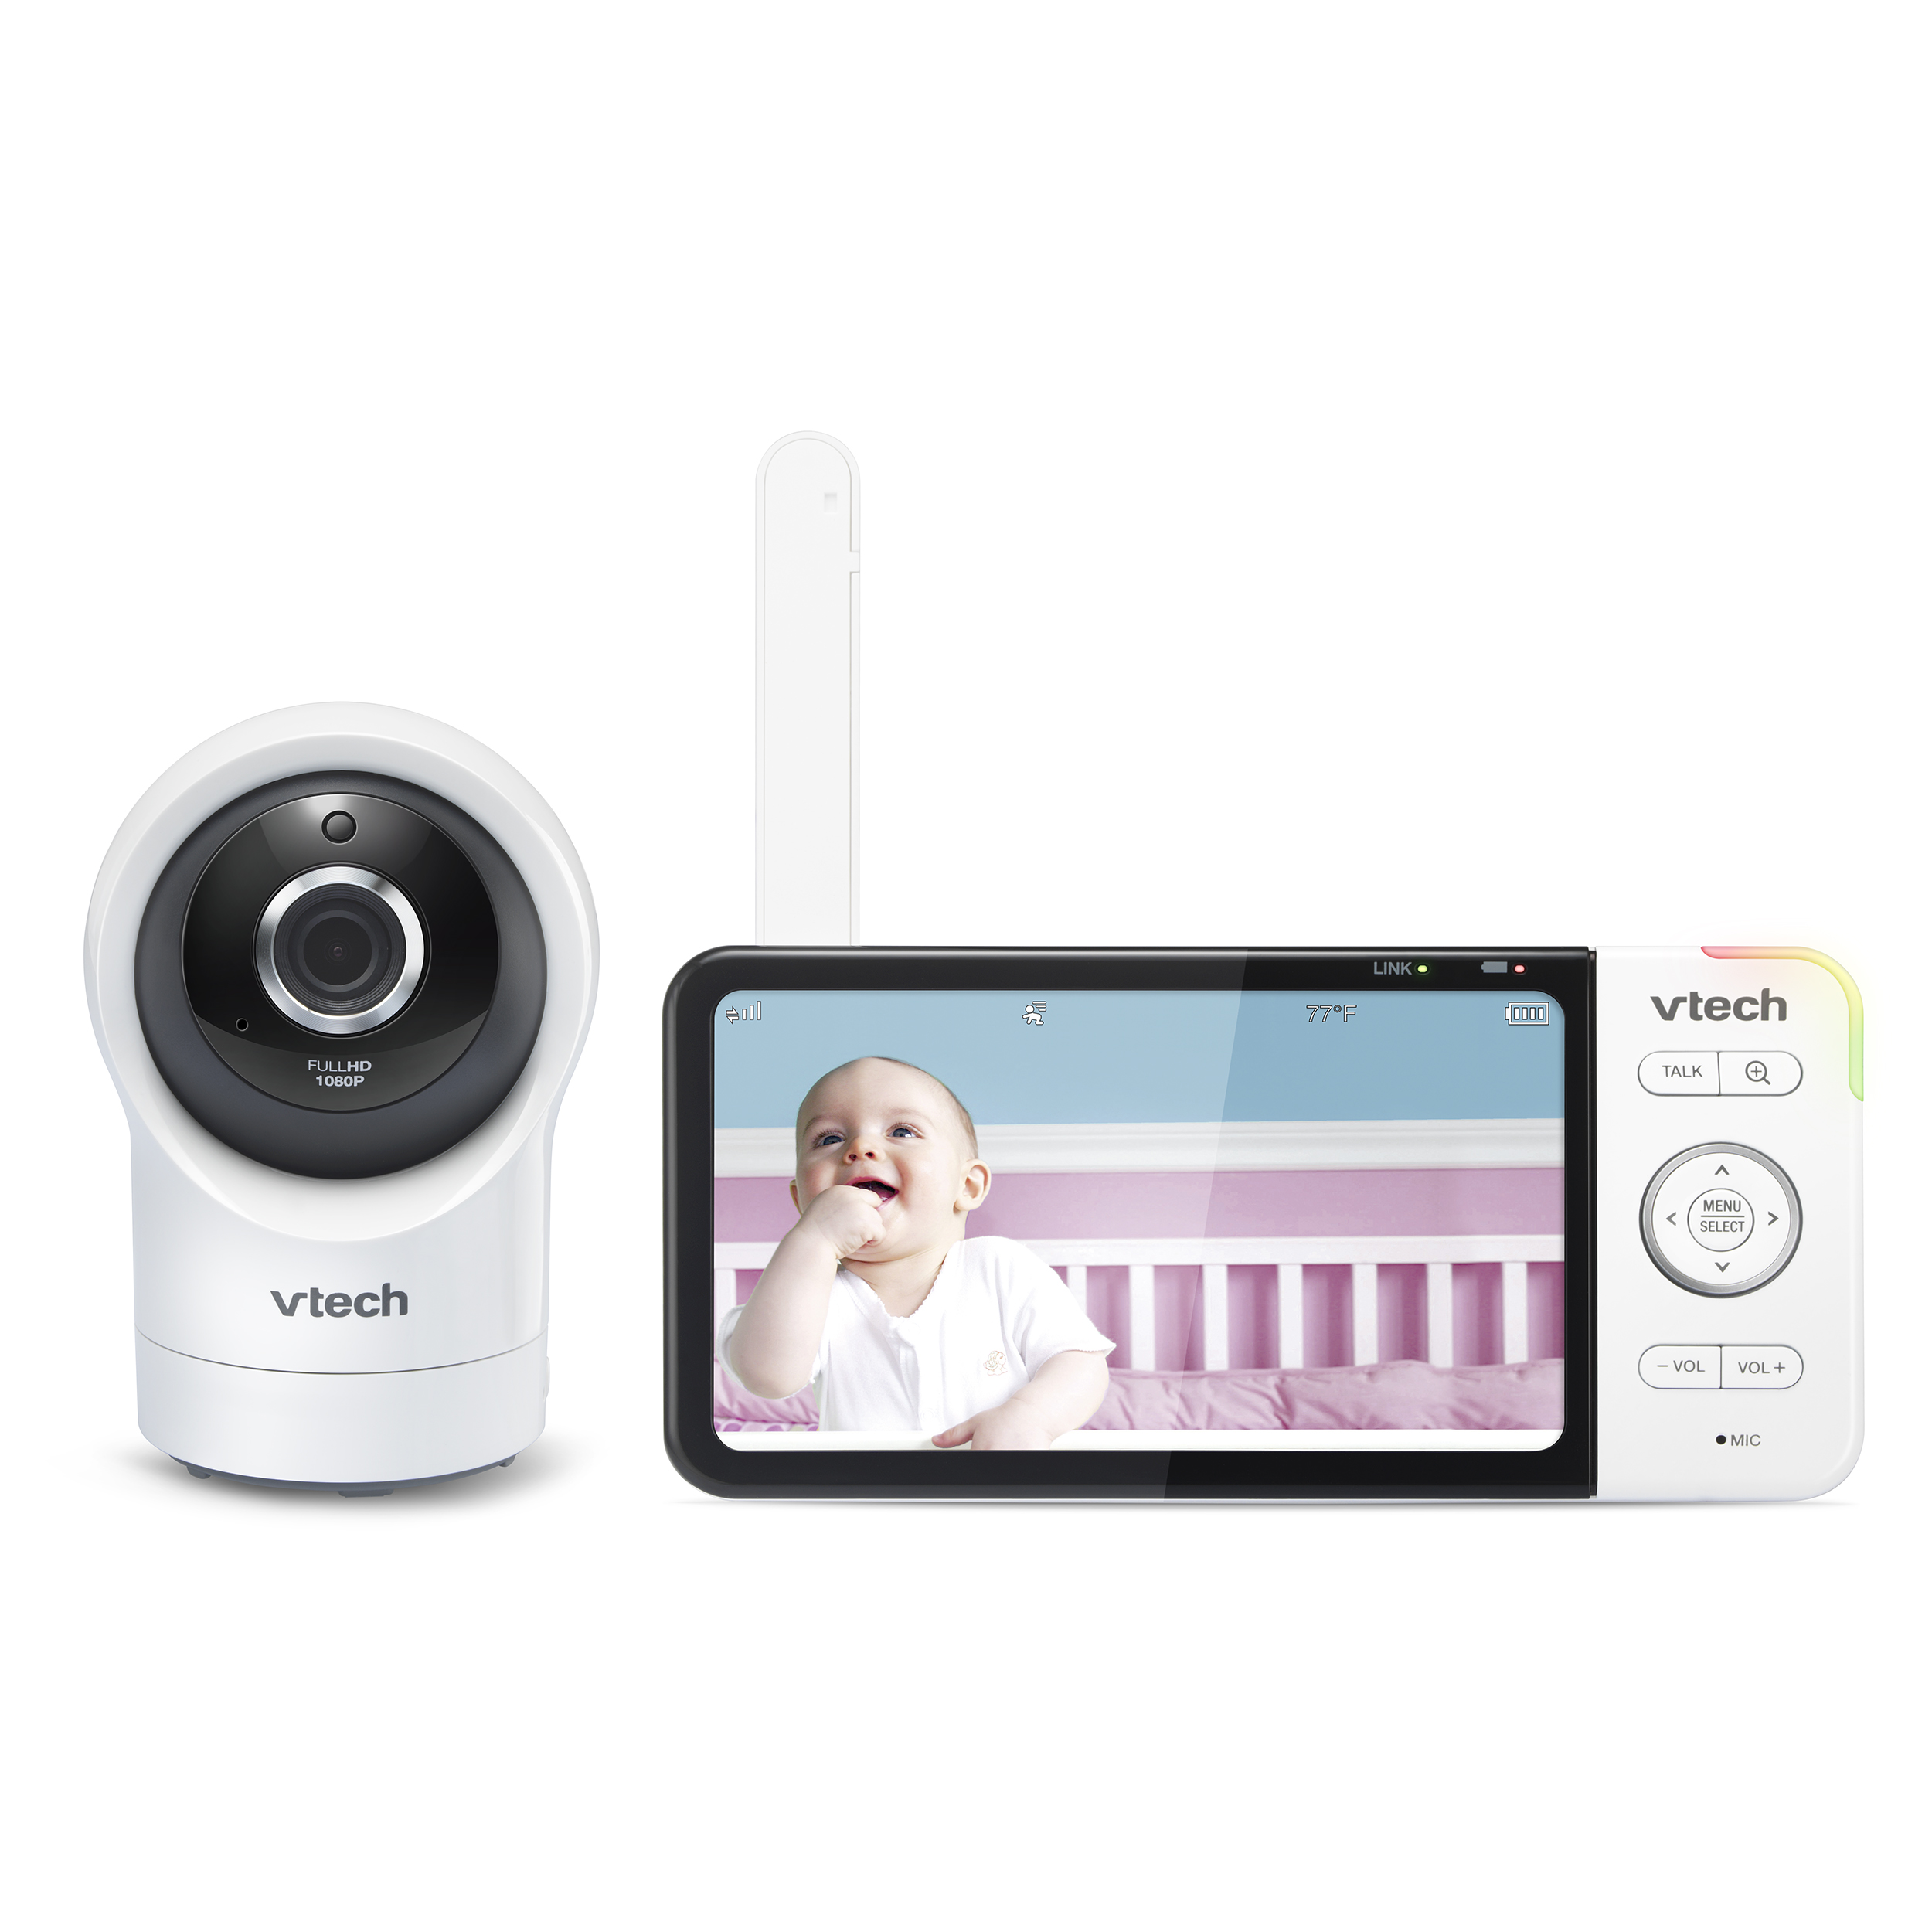 VTech Smart Wi-Fi Video Baby Monitor with 5″ High Definition Display and 1080 p 360 degree Panoramic Viewing Pan & Tilt HD Camera, RM5864HD (White)